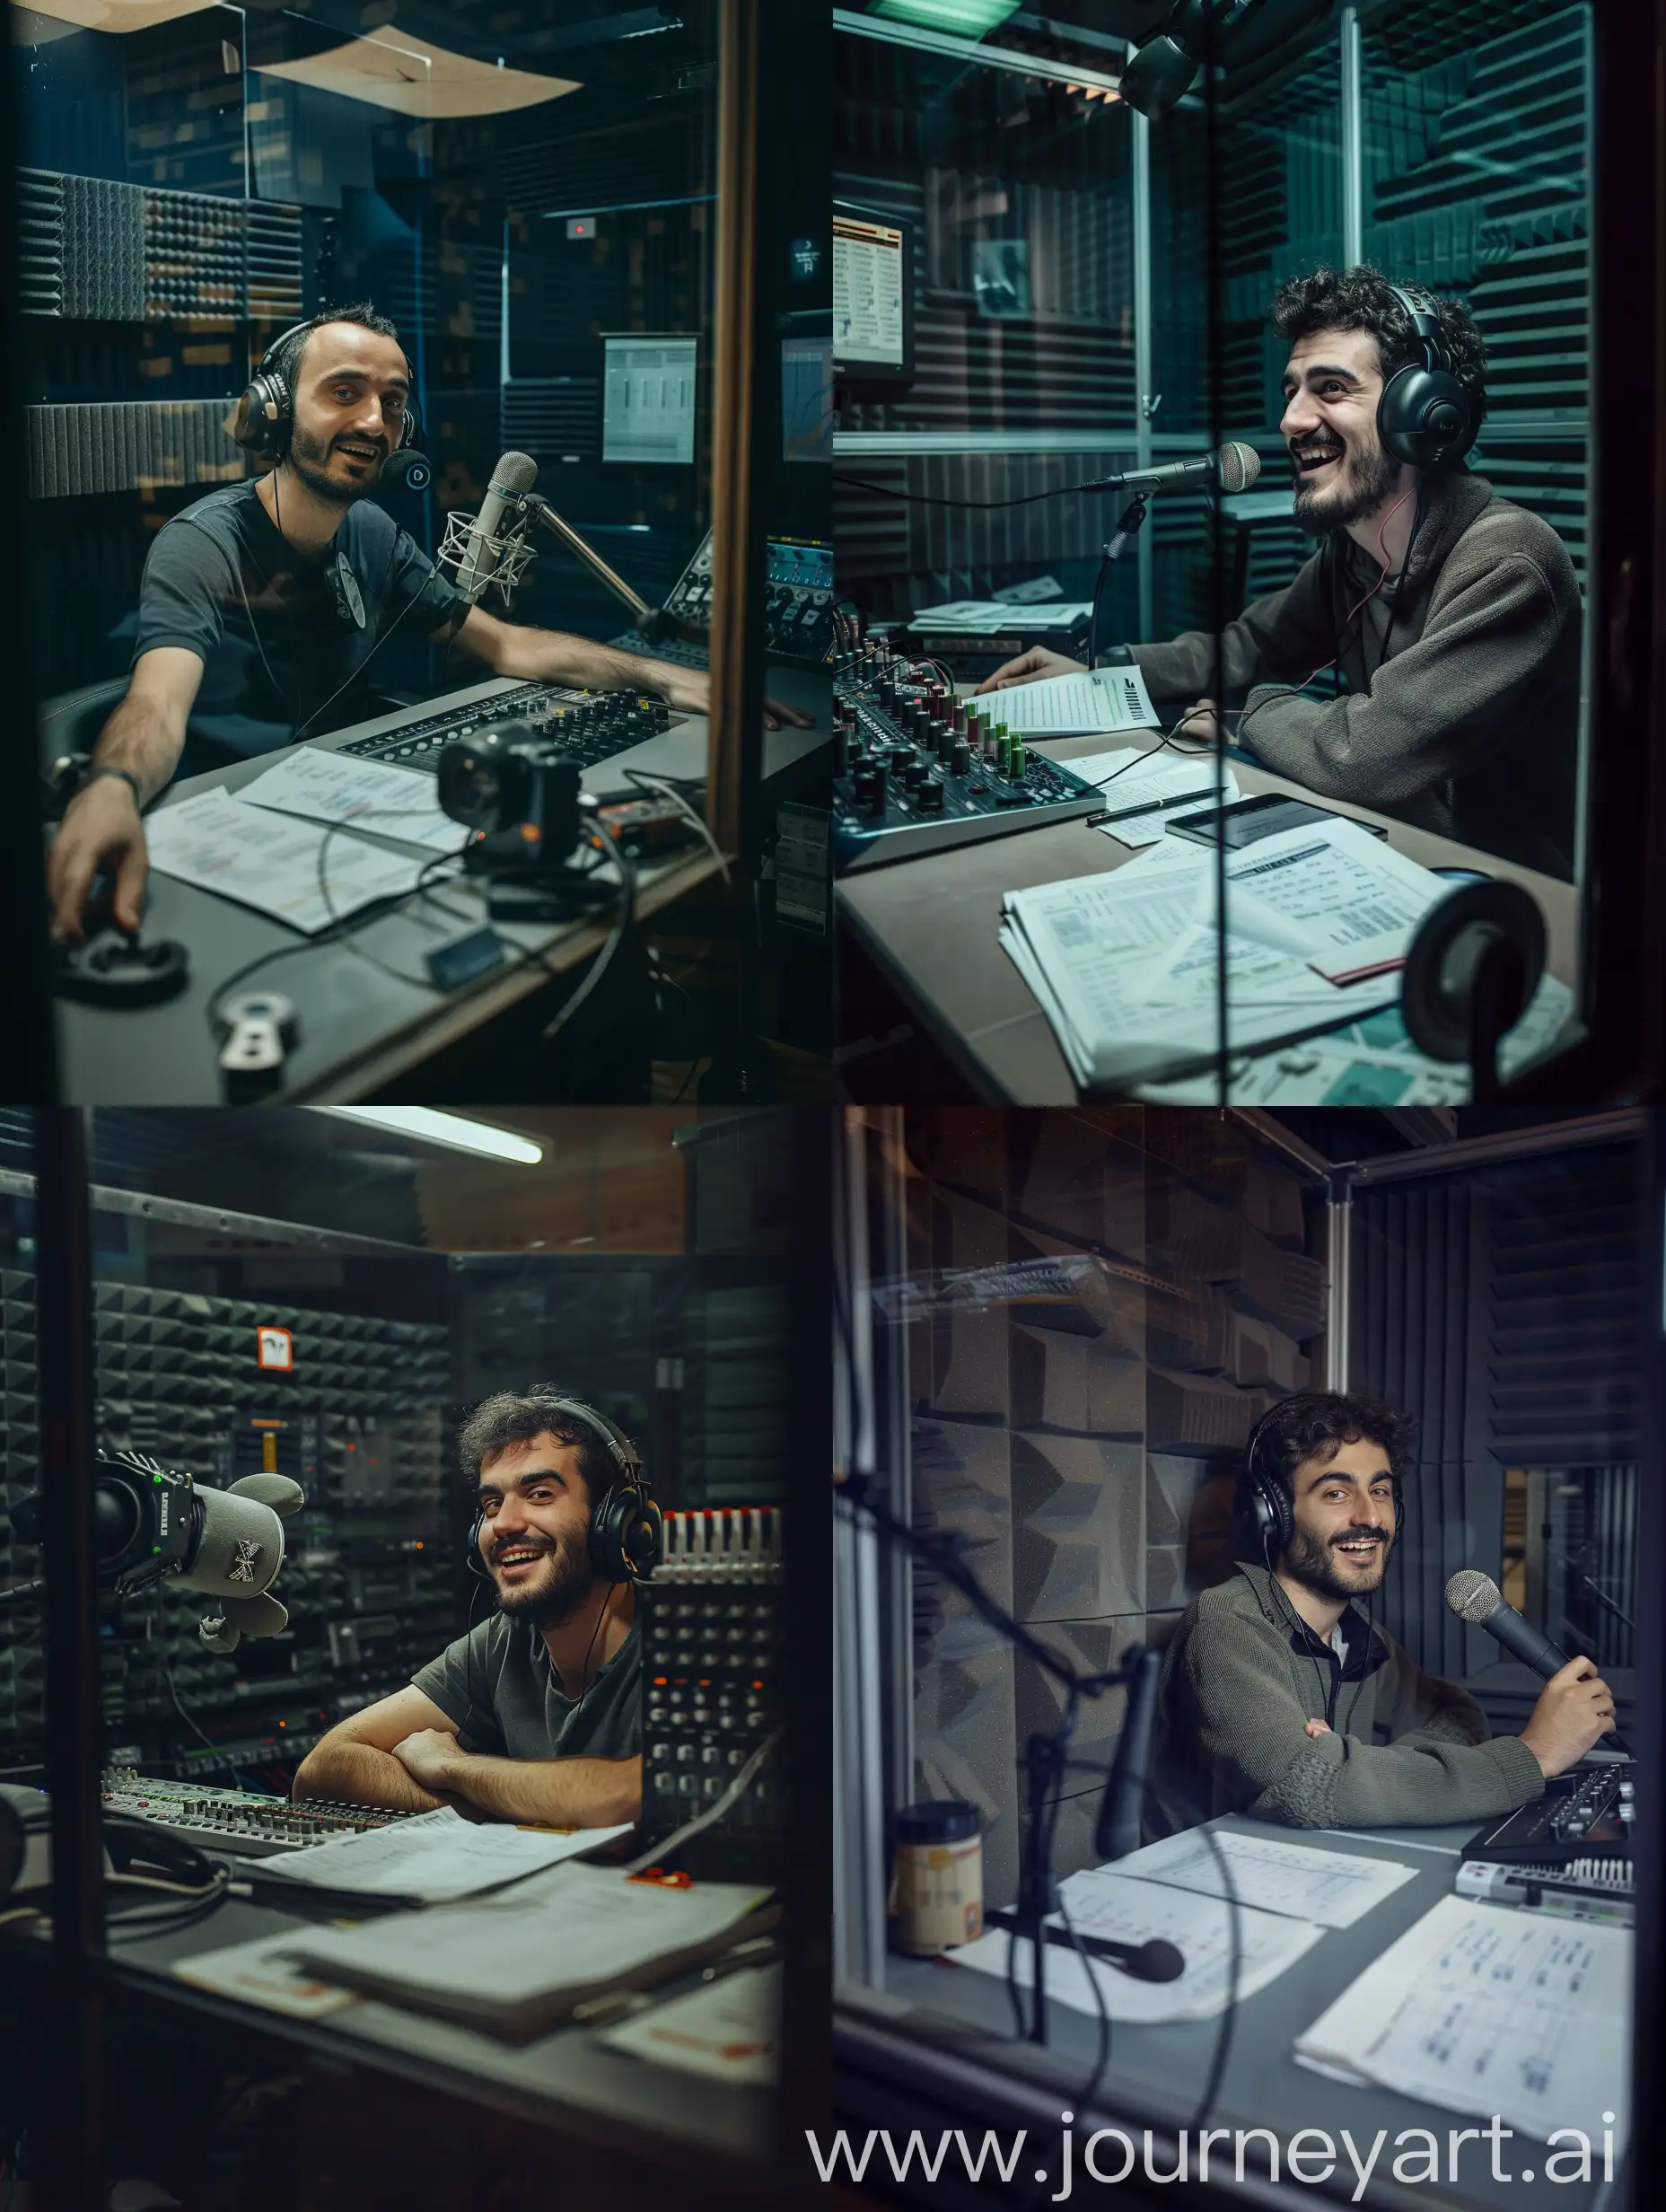 A 26 year old male Italian radio speaker speaks into the microphone, in his small radio broadcast room. The room is very small and empty and the walls are covered in sound-absorbing material. The speaker has an amused face, is wearing a pair of headphones and has his arms resting on the table. Next to him there are some sheets of notes and a small audio mixer. In front of him there is a large glass window that divides the room from the control room. The speaker looks to the side, slightly down, straight at the lens positioned next to him. The photo is in color with a dark atmosphere